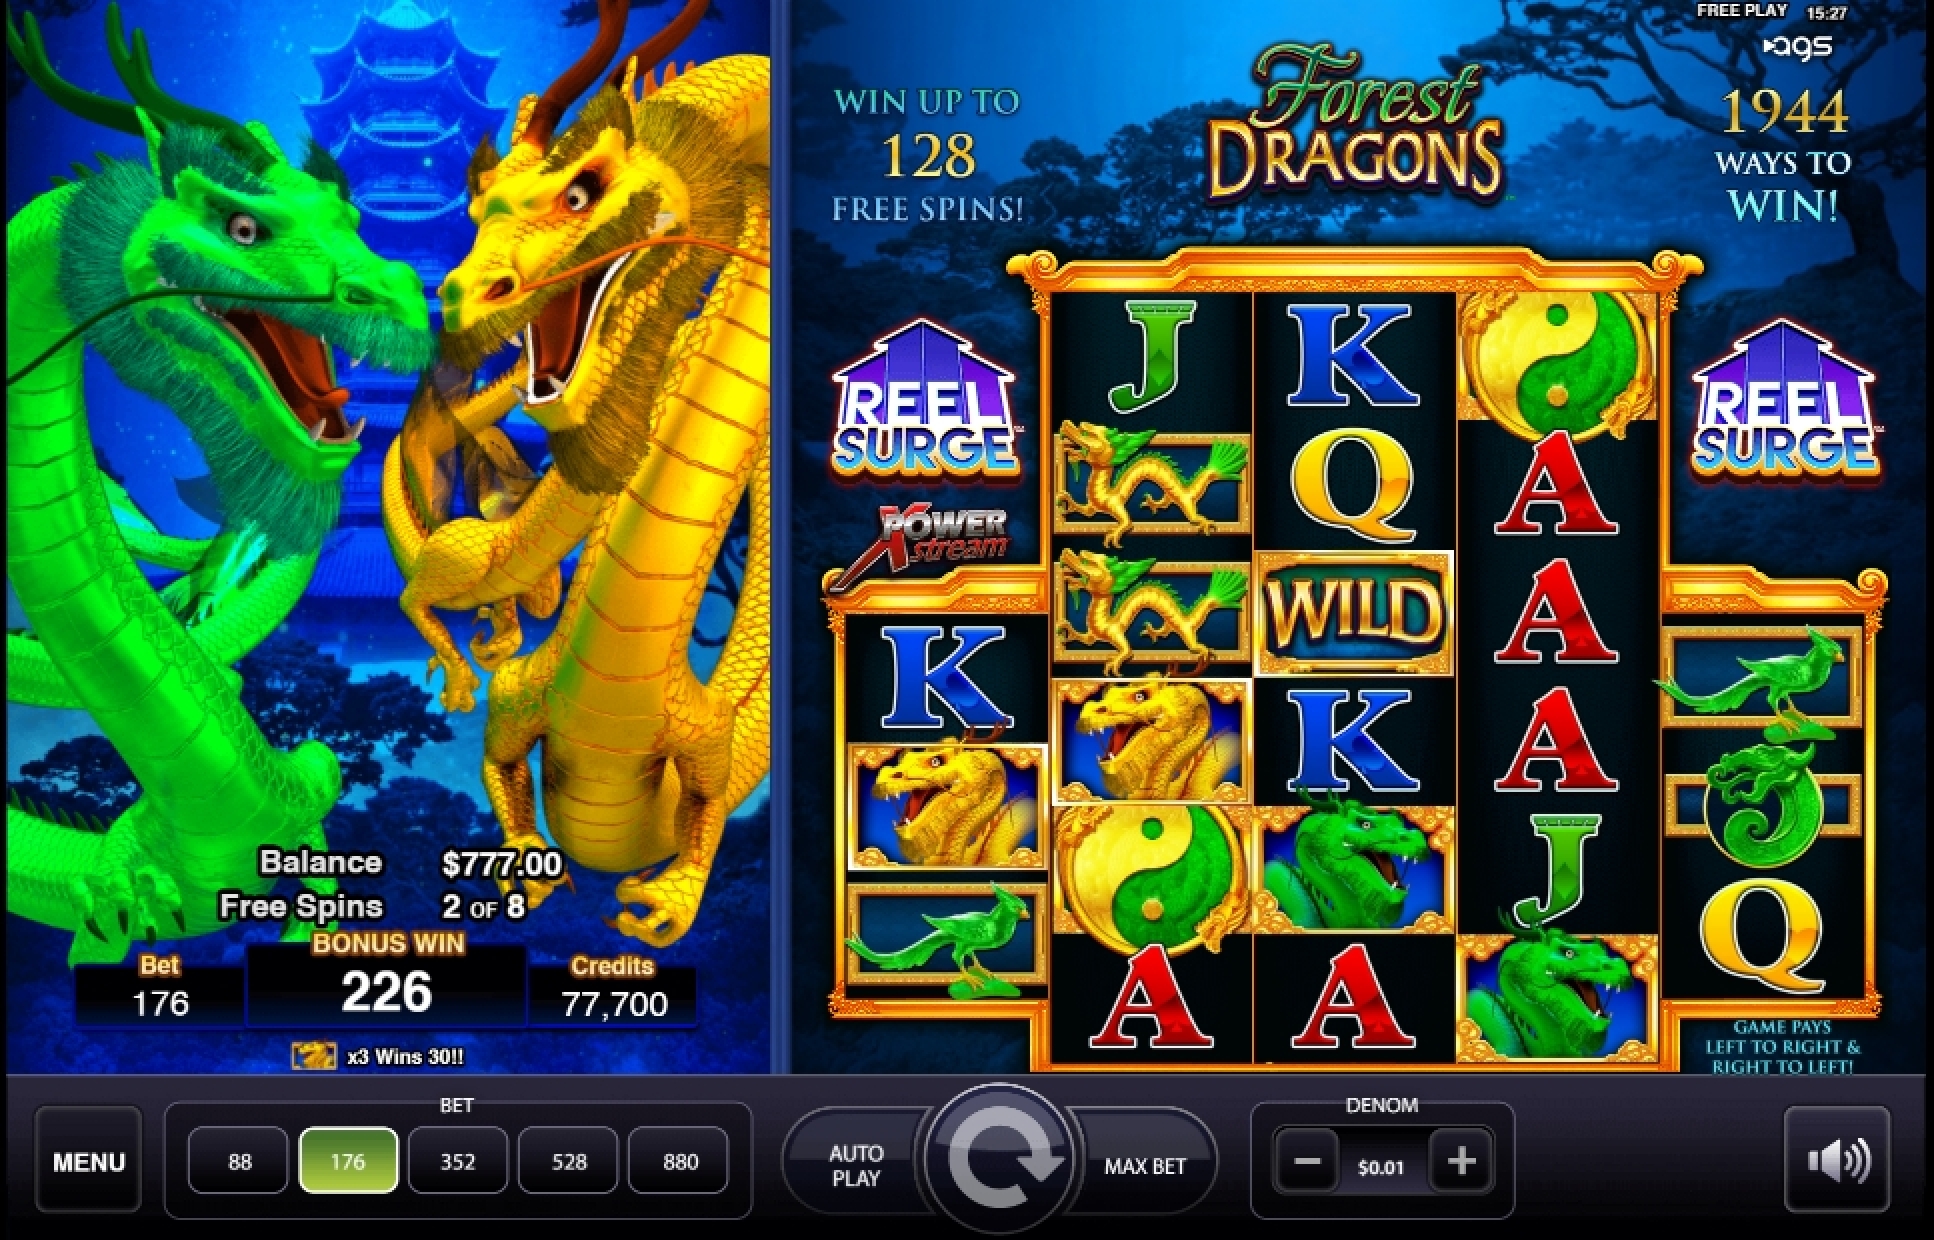 Reels in Forest Dragons Slot Game by AGS